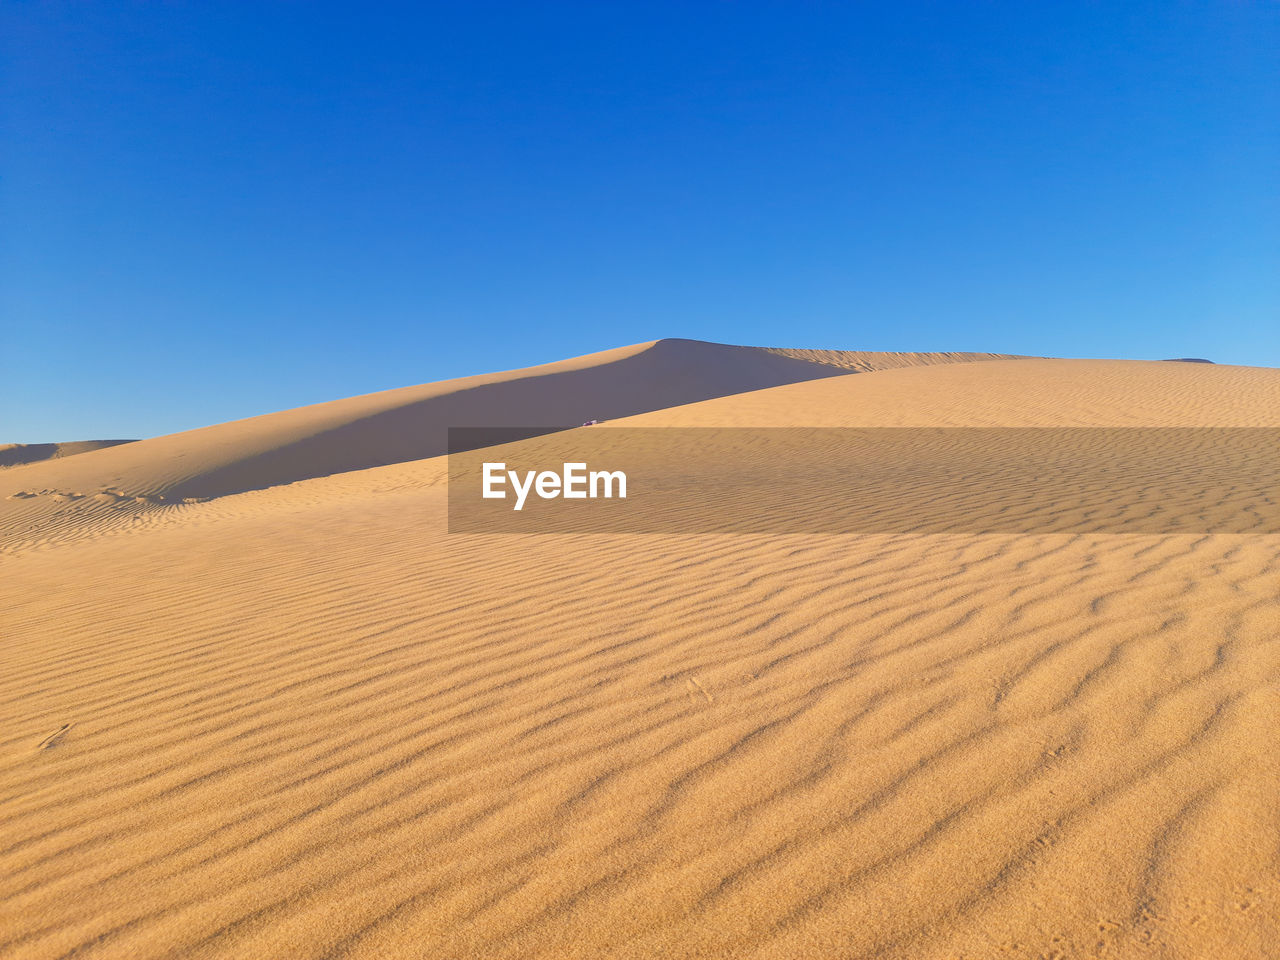 SCENIC VIEW OF SAND DUNES AGAINST CLEAR SKY